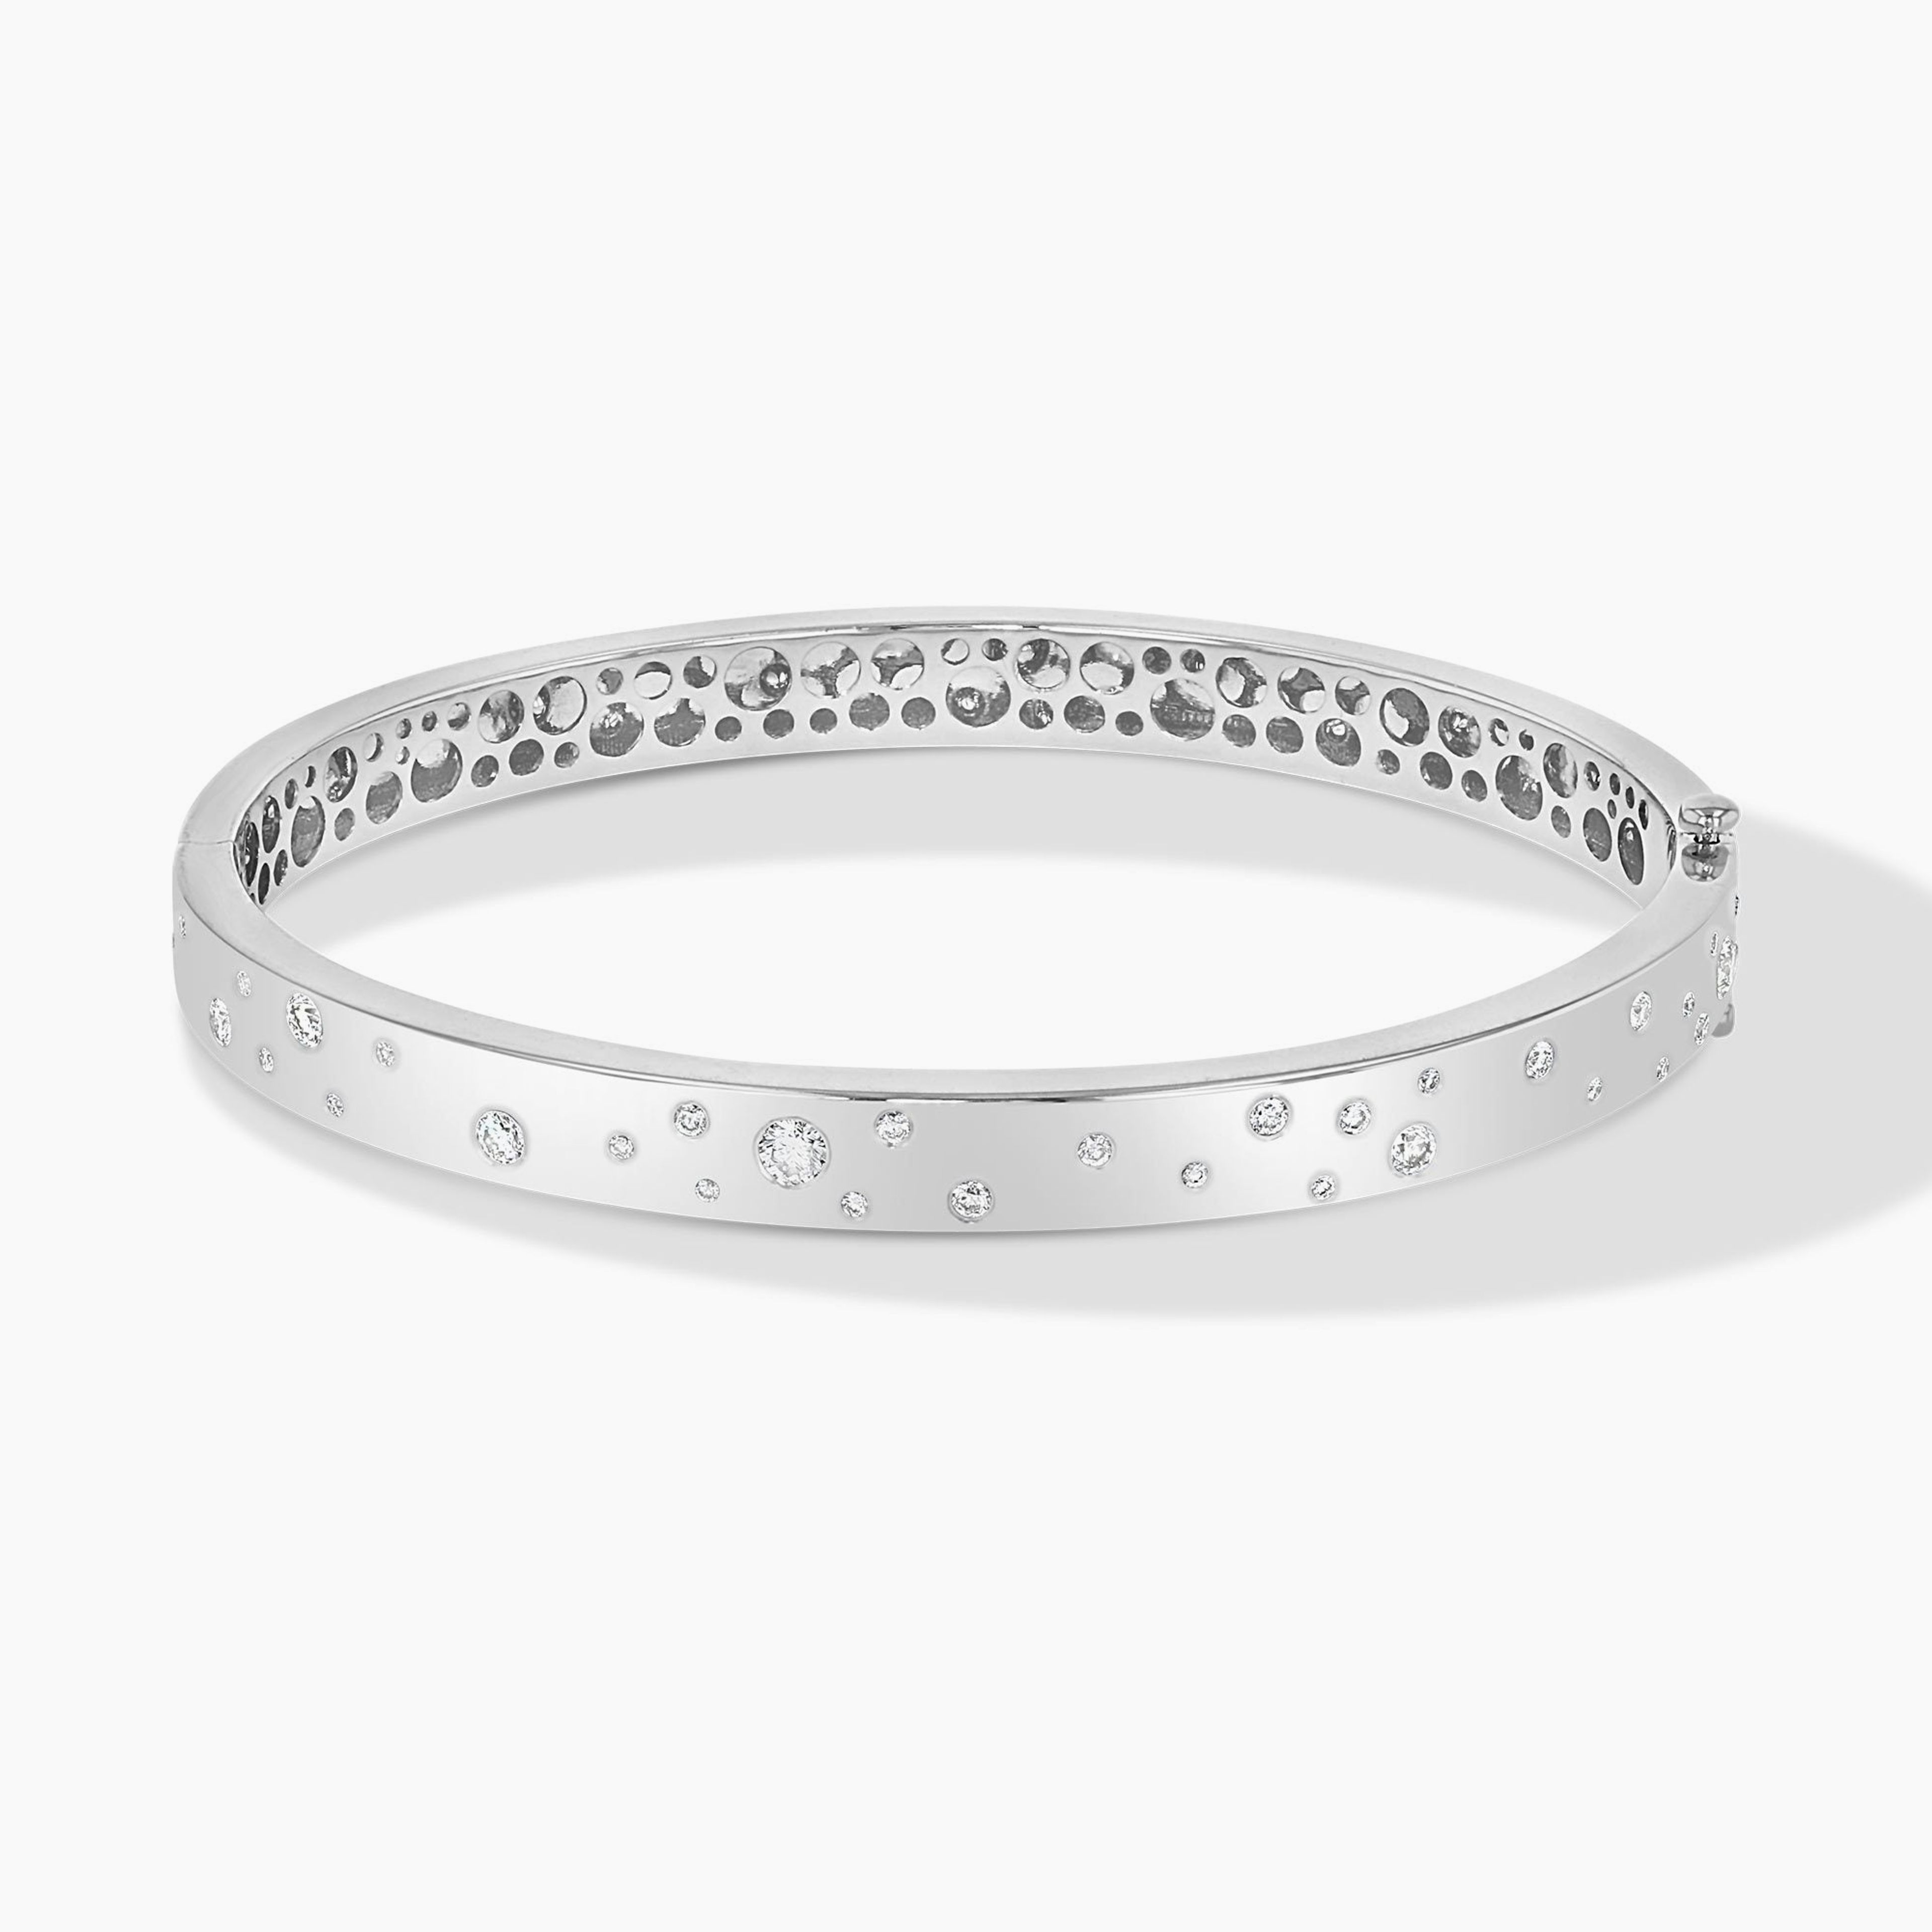 Stardust Astral Bangle